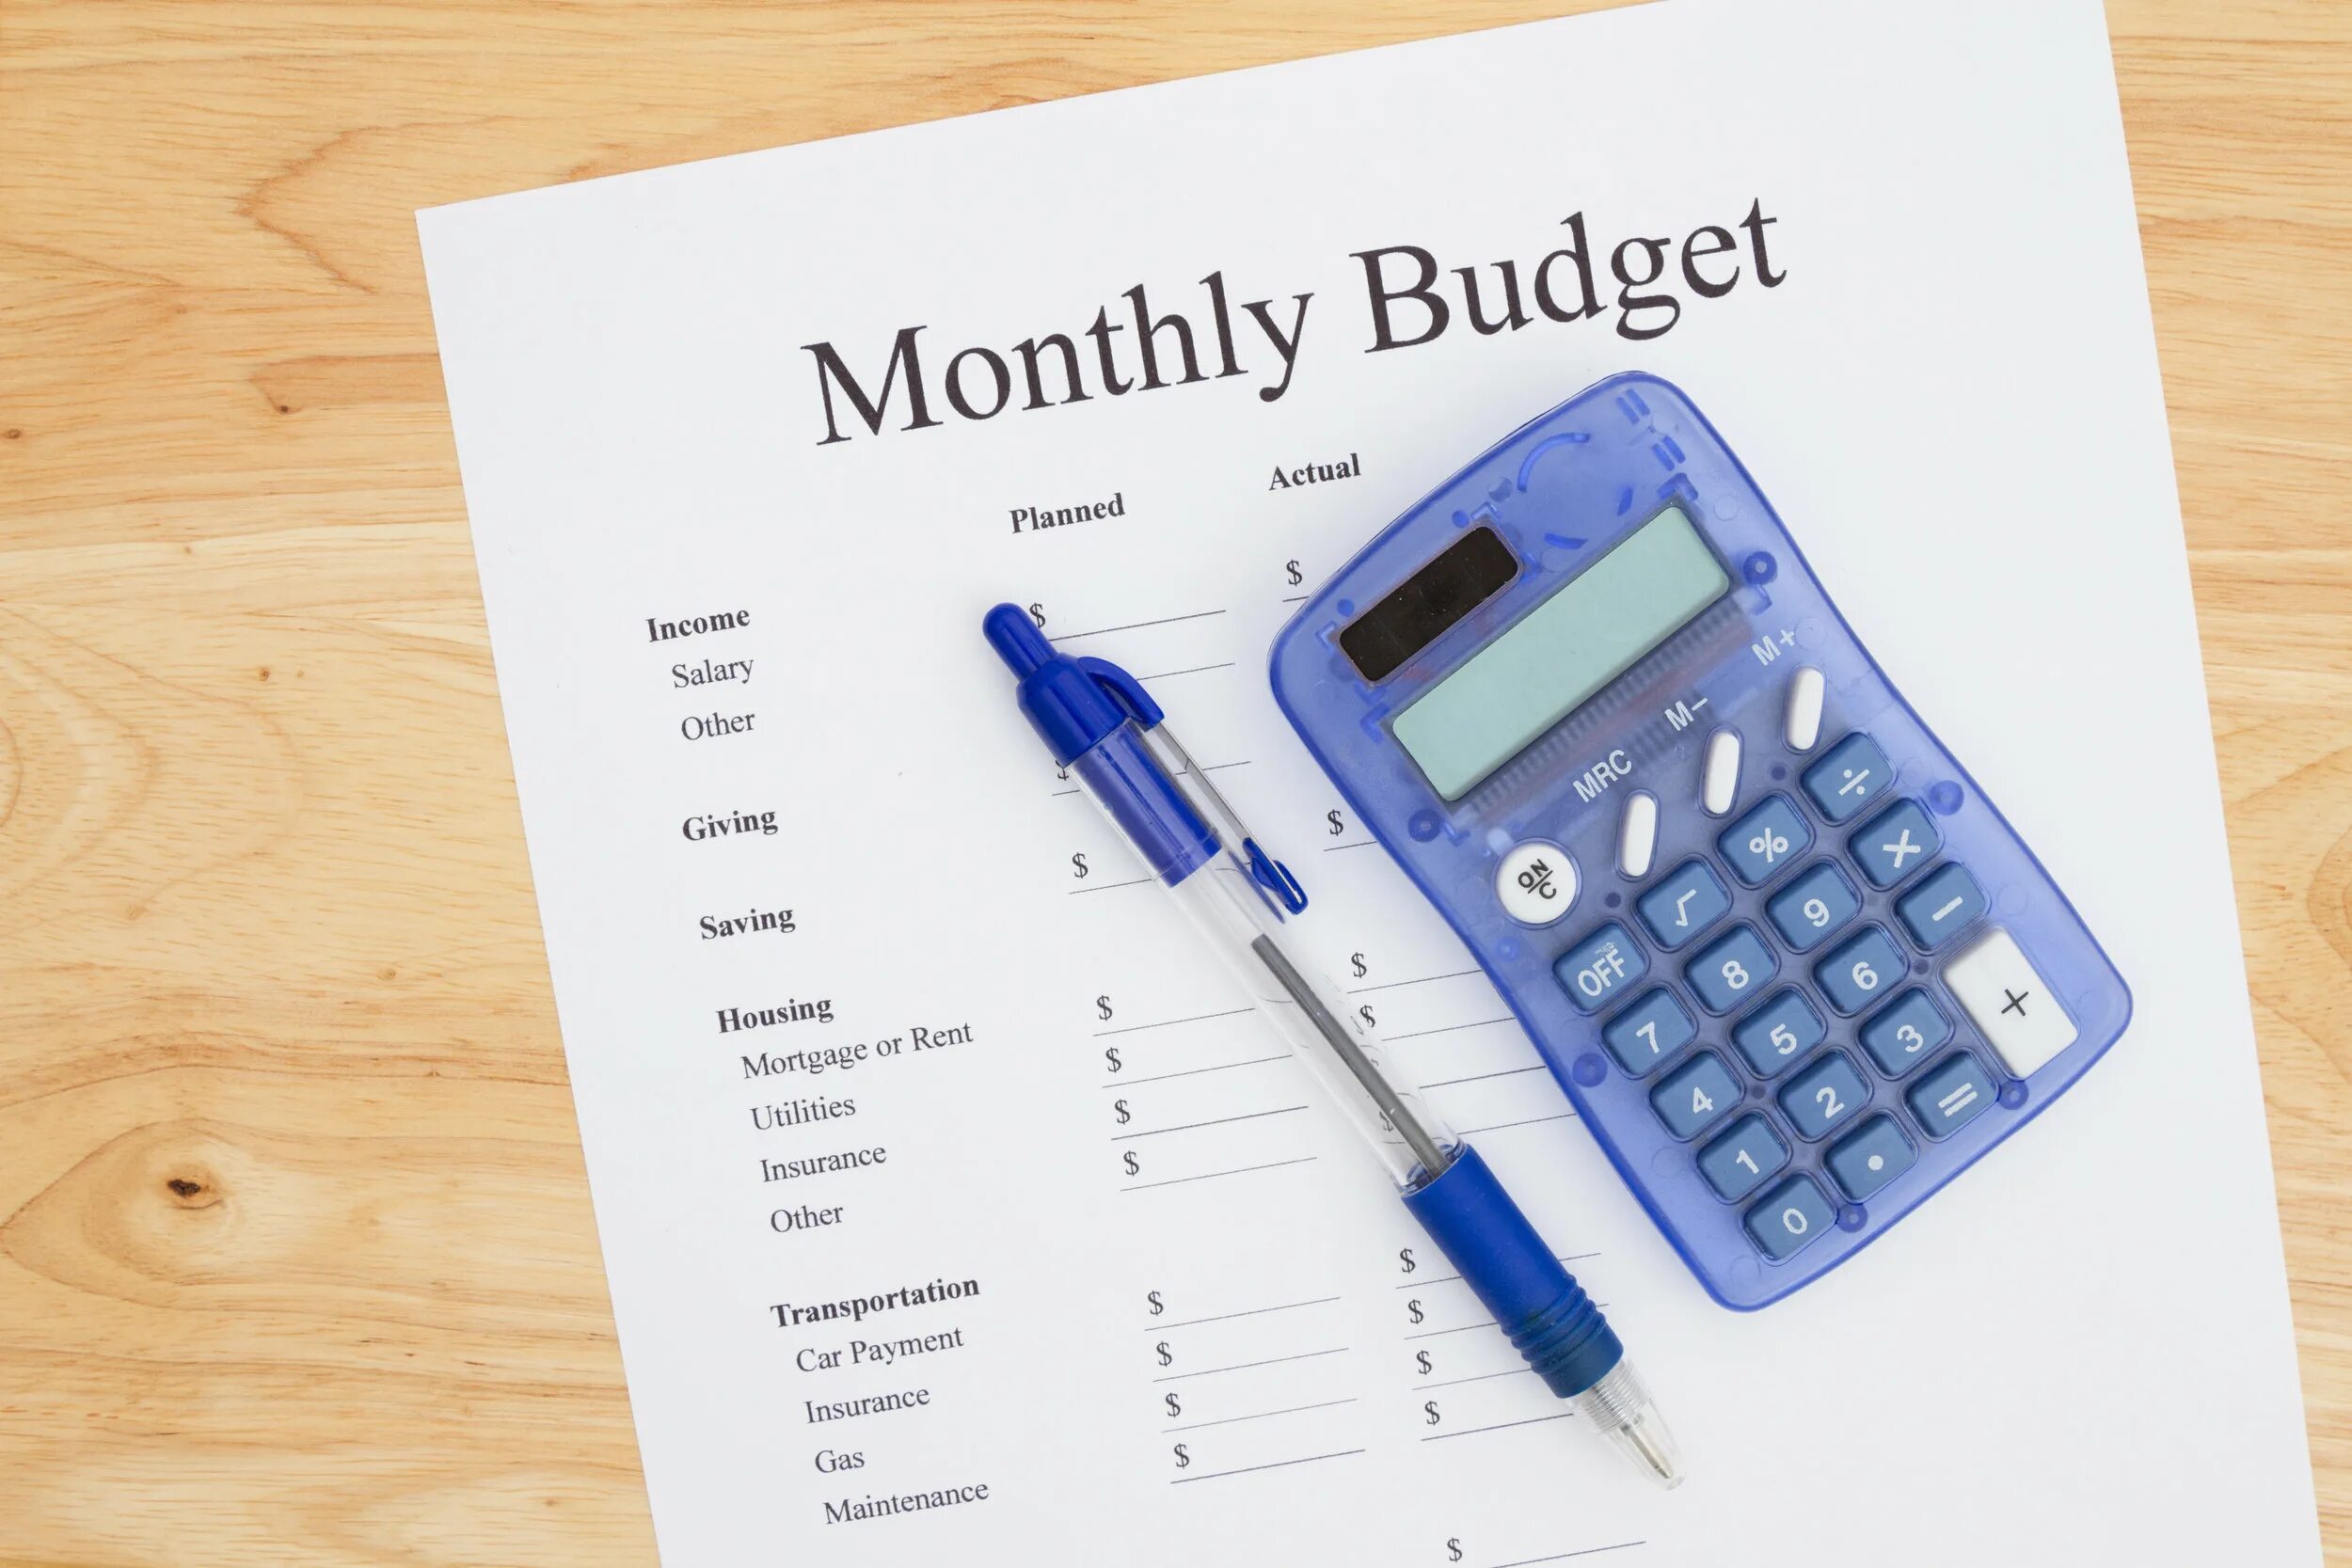 Month salary. Monthly budget. Your monthly budget. Make a budget фото. A personal budget картинки.